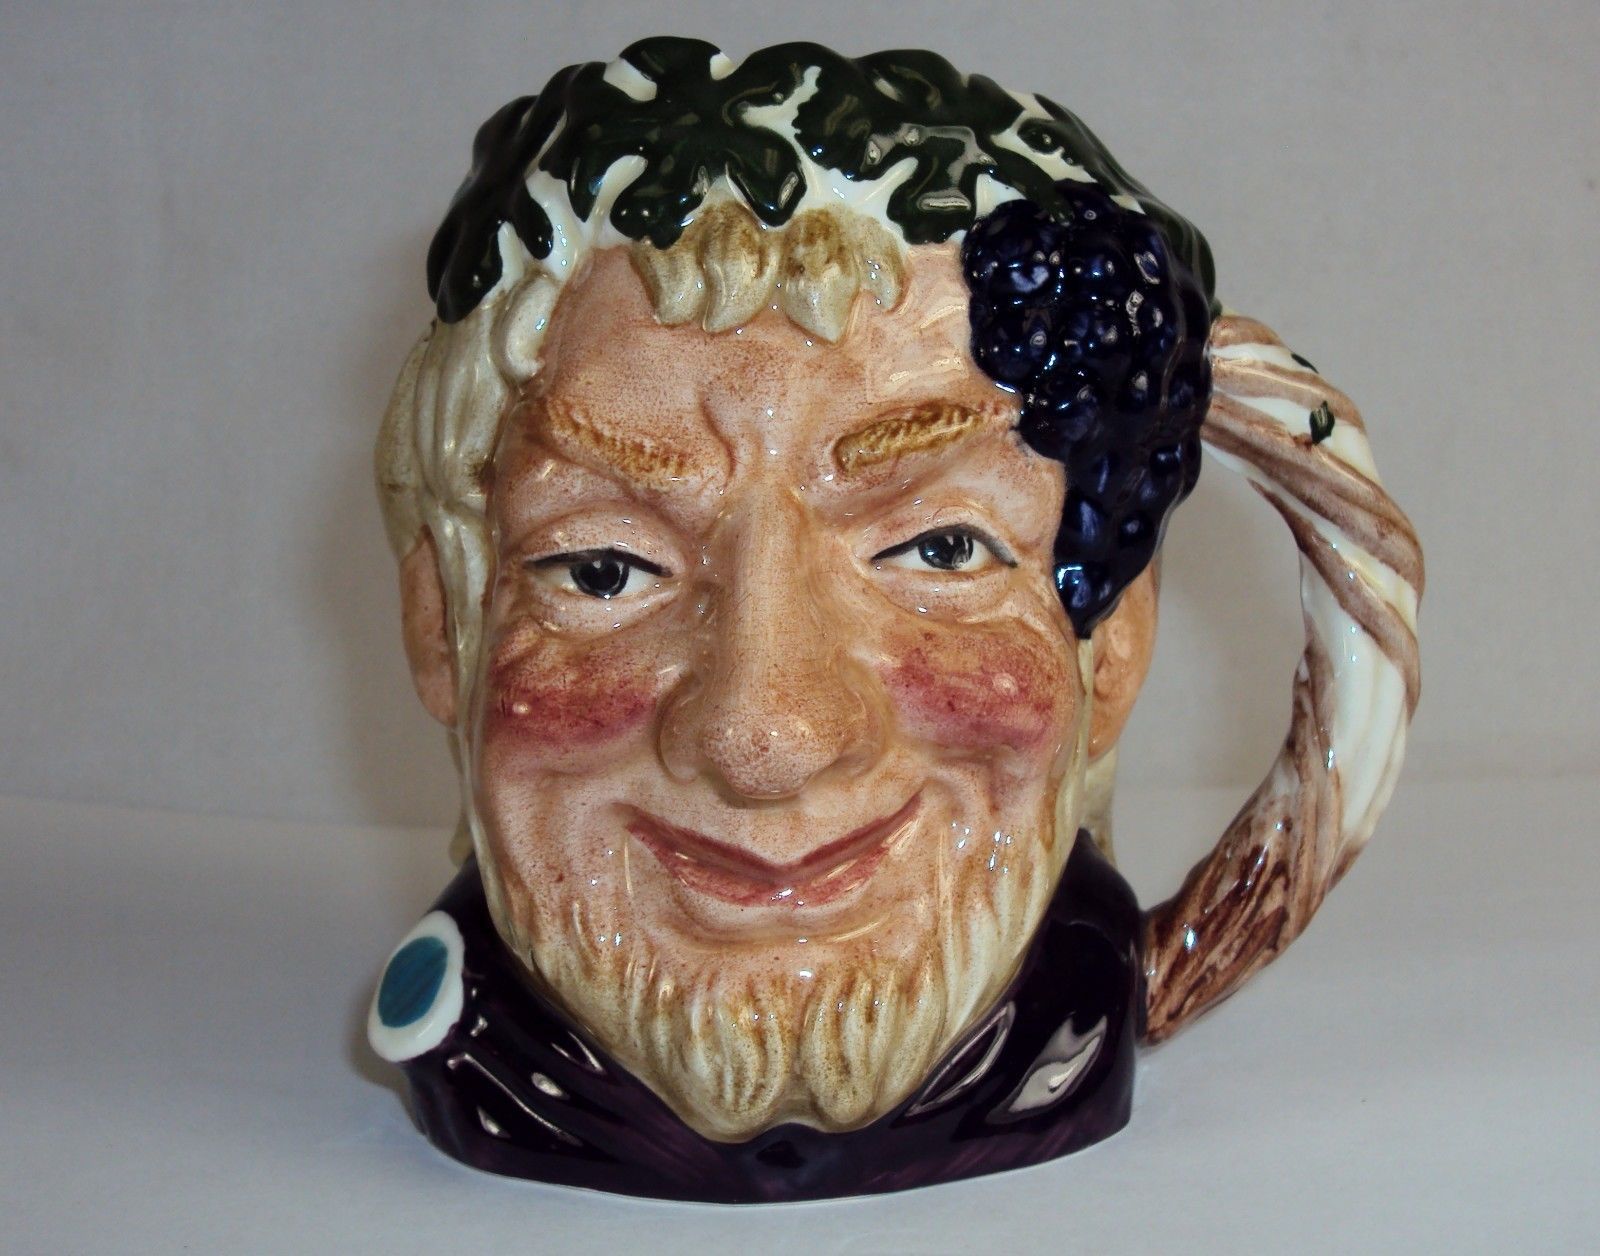 Primary image for Toby Character Jug (Small) ~"Bacchus" ~ Royal Doulton D6505, 1958, #9120240